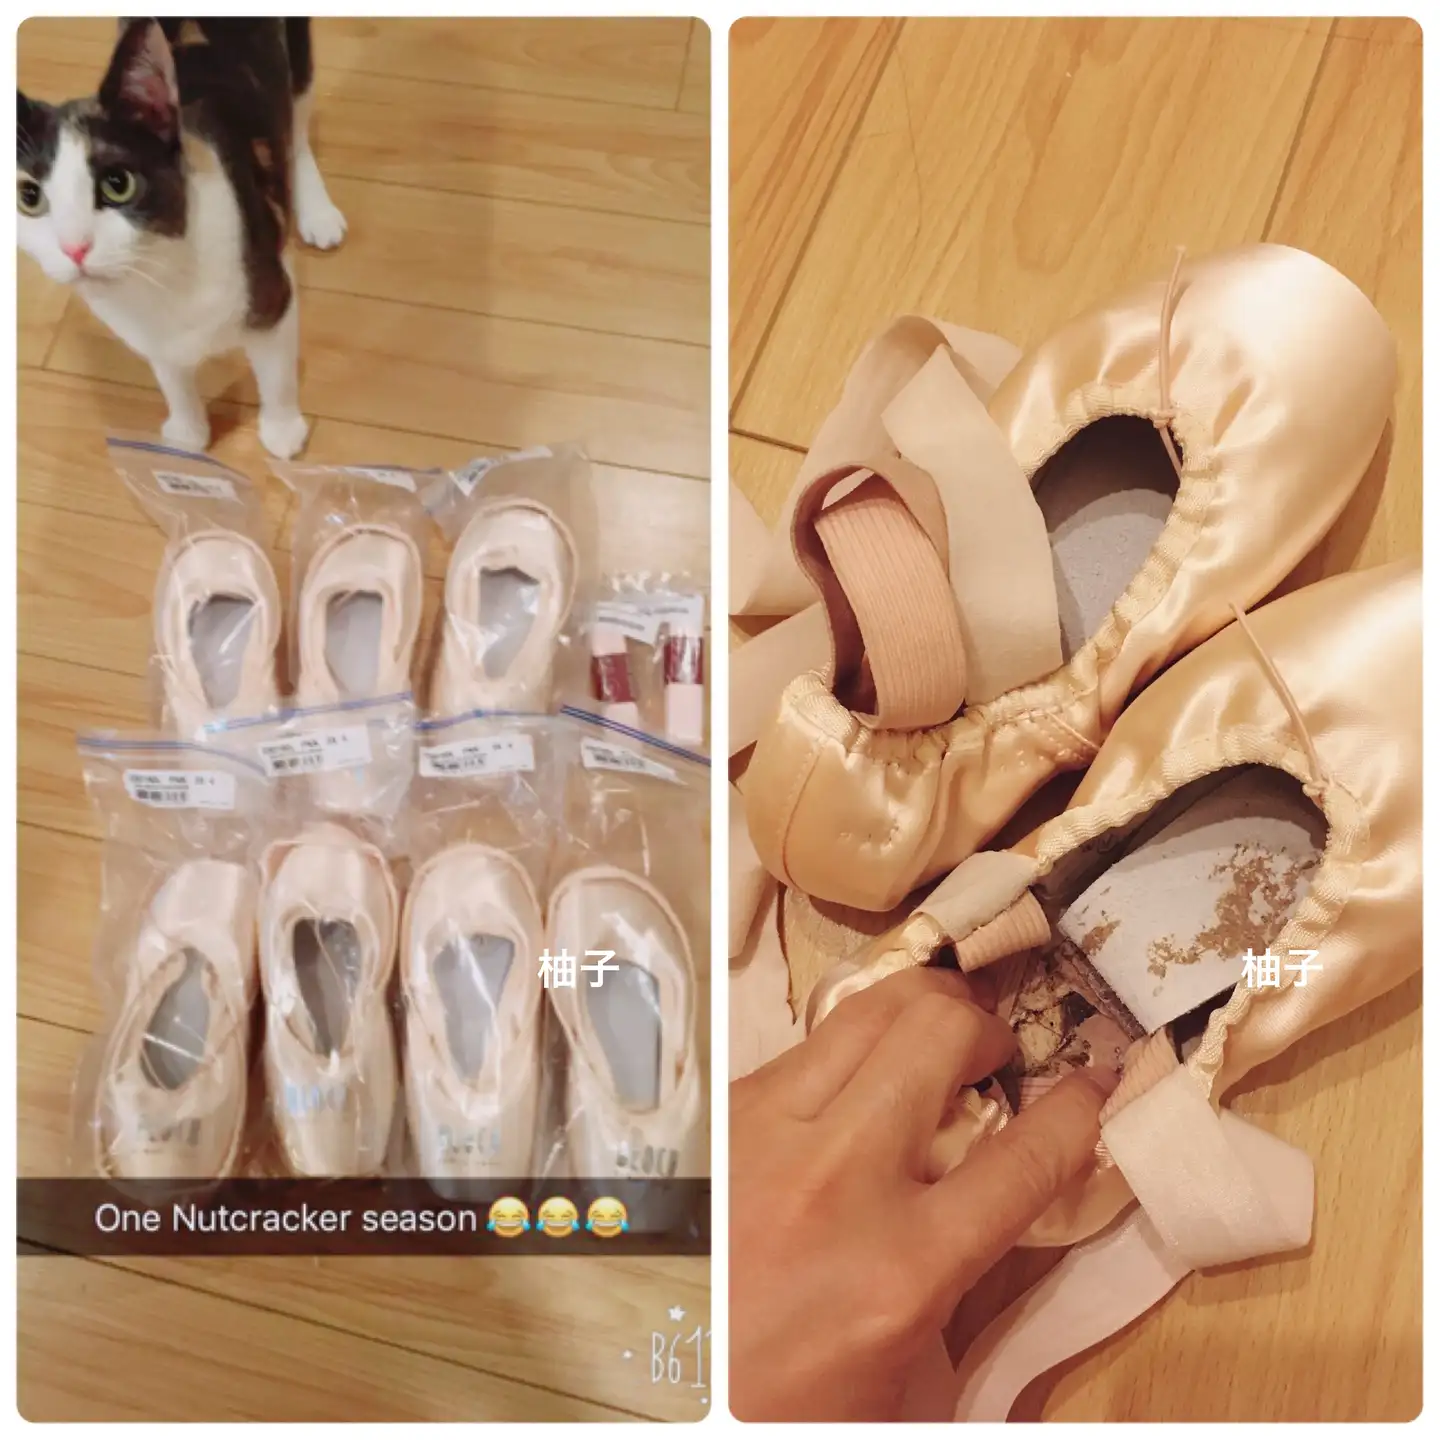 How Royal Ballet dancers prepare their pointe shoes 